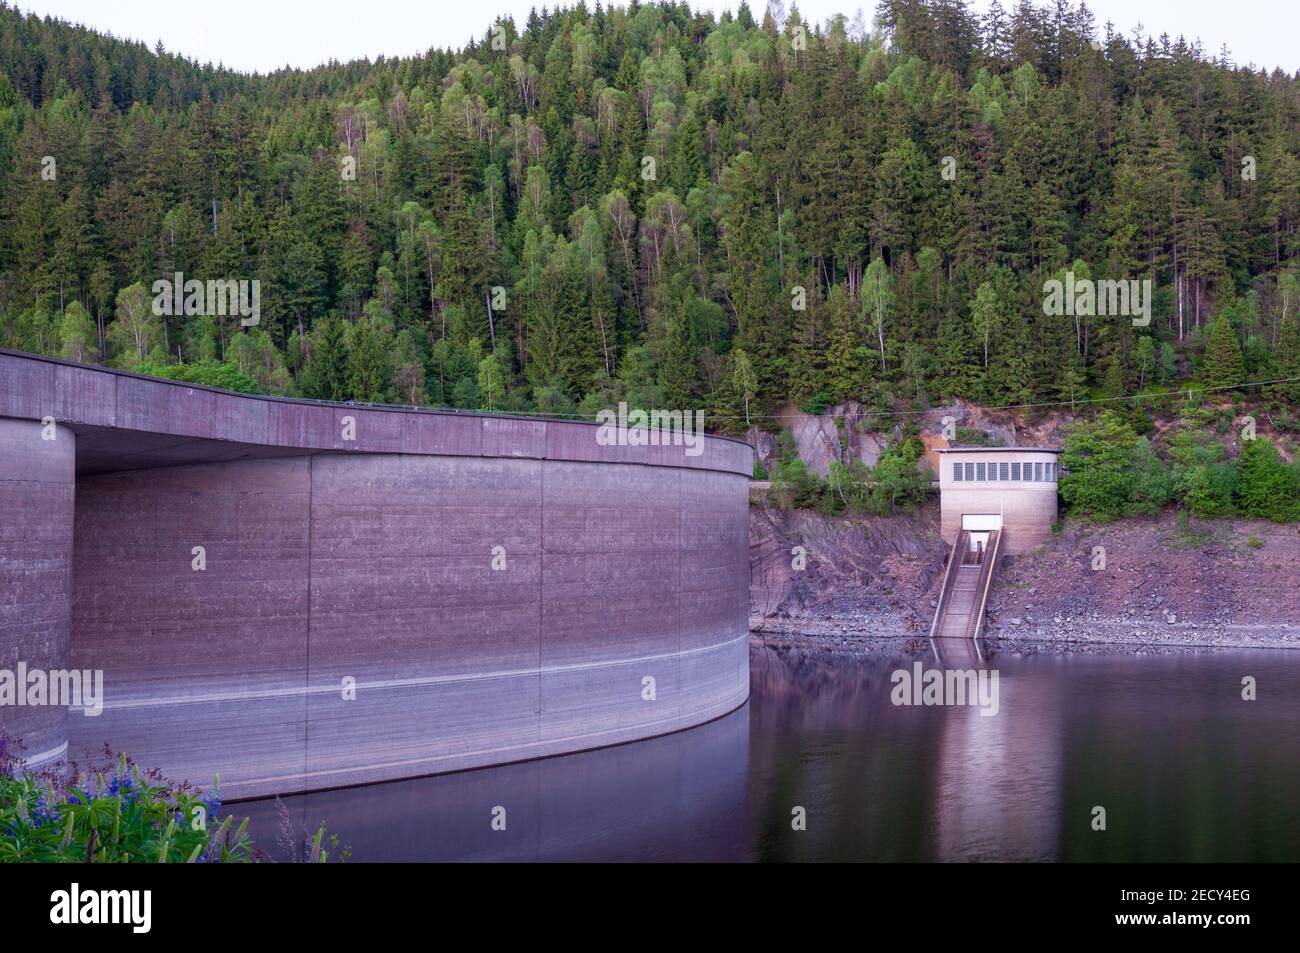 Okertal dam in the Harz mountains in Germany Stock Photo